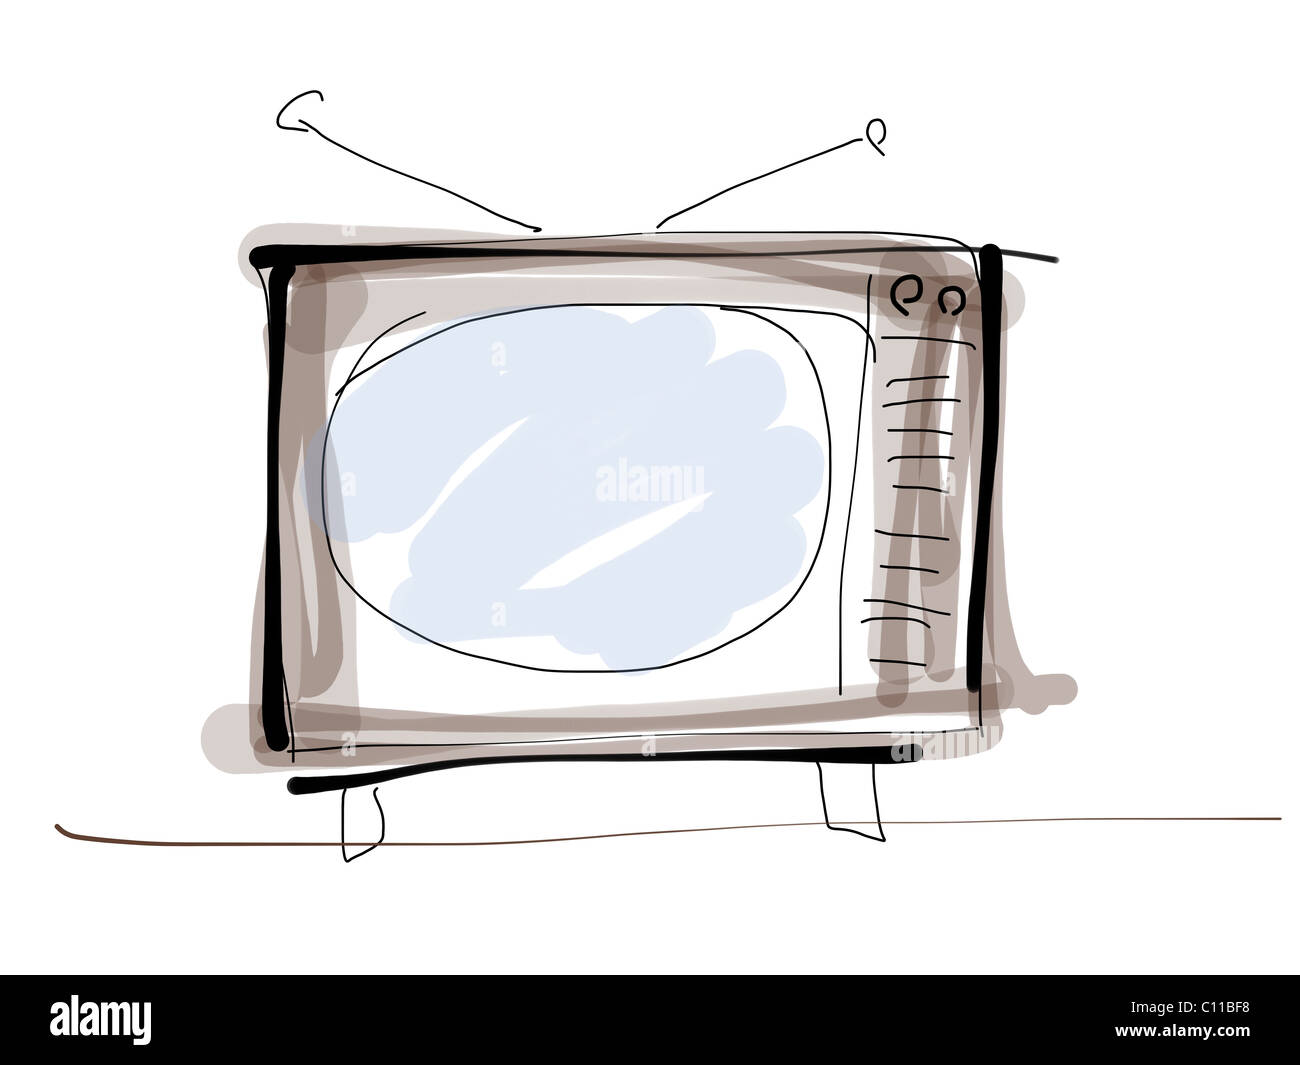 illustration of an old style Television Stock Photo